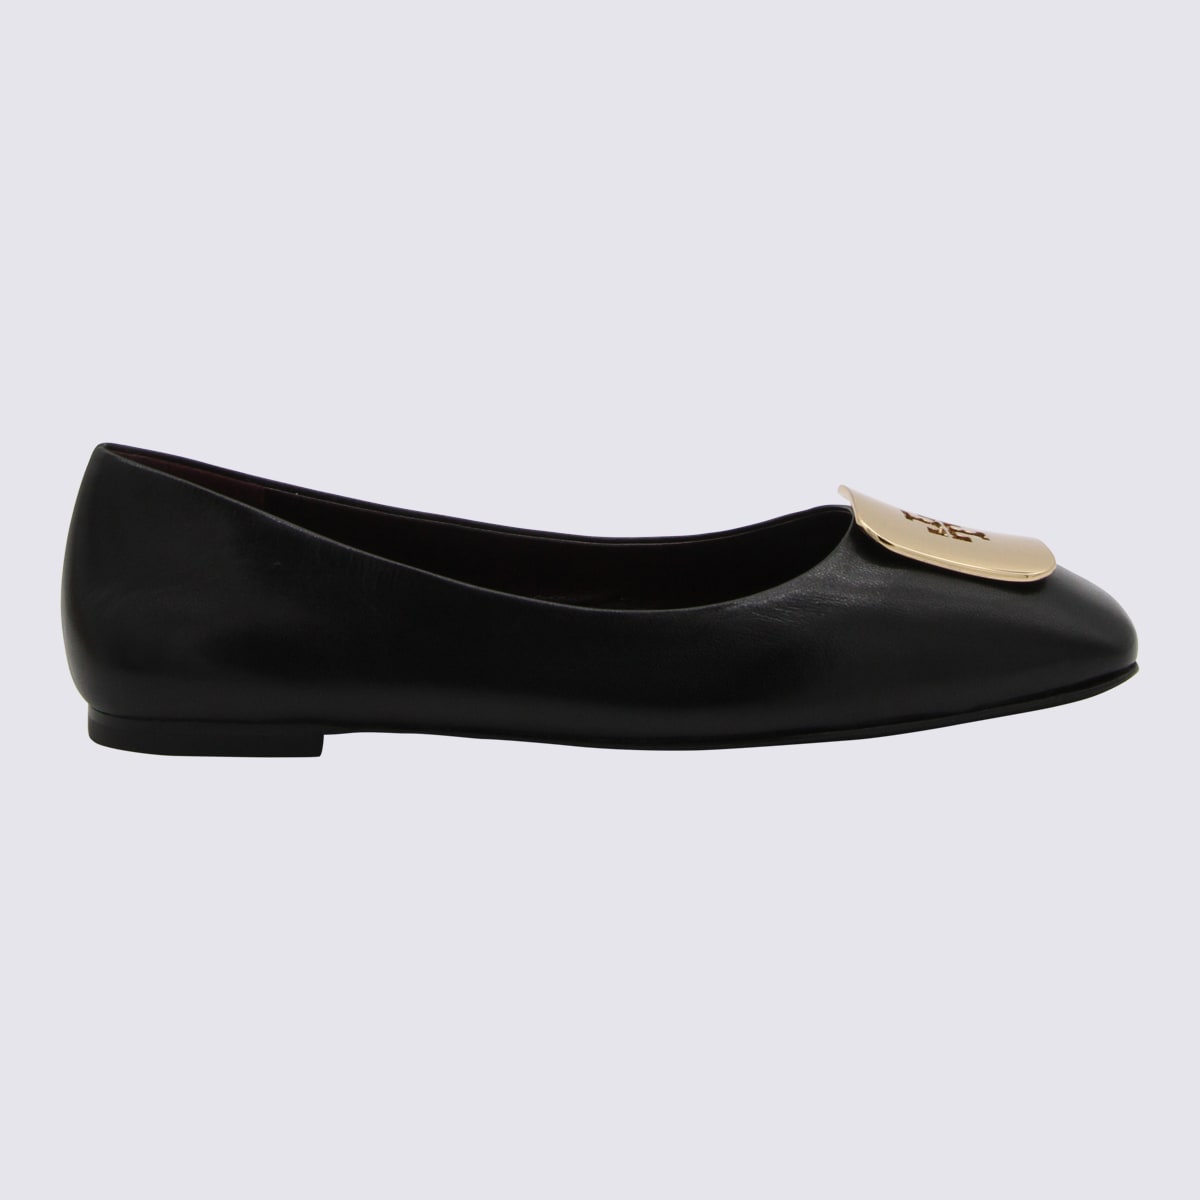 Tory Burch Black Leather Ballerina Shoes